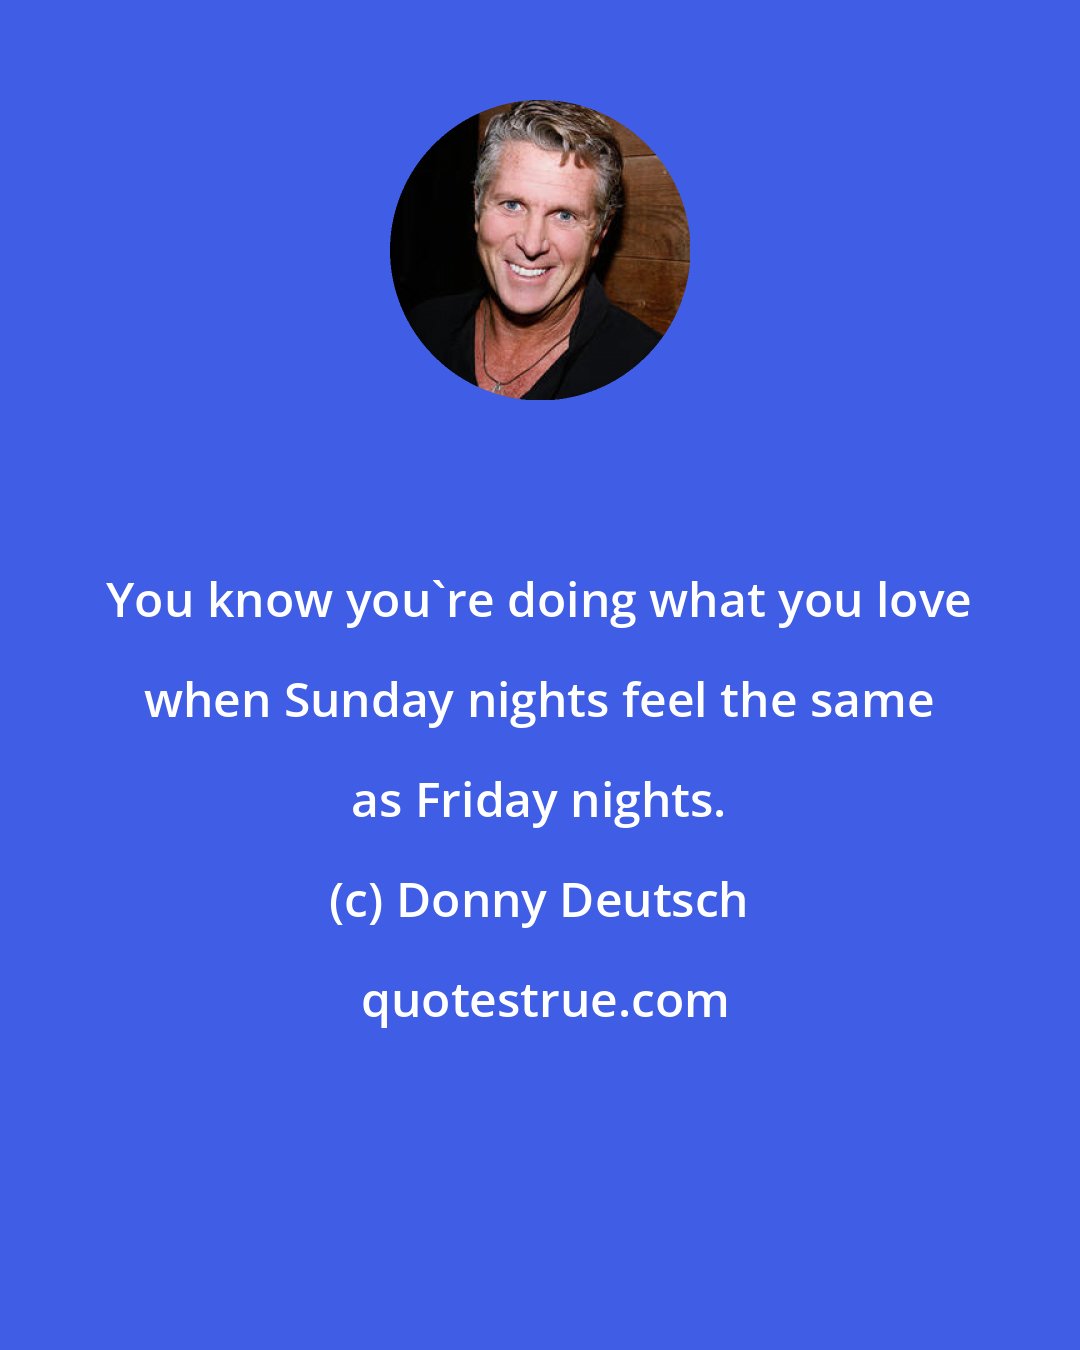 Donny Deutsch: You know you're doing what you love when Sunday nights feel the same as Friday nights.